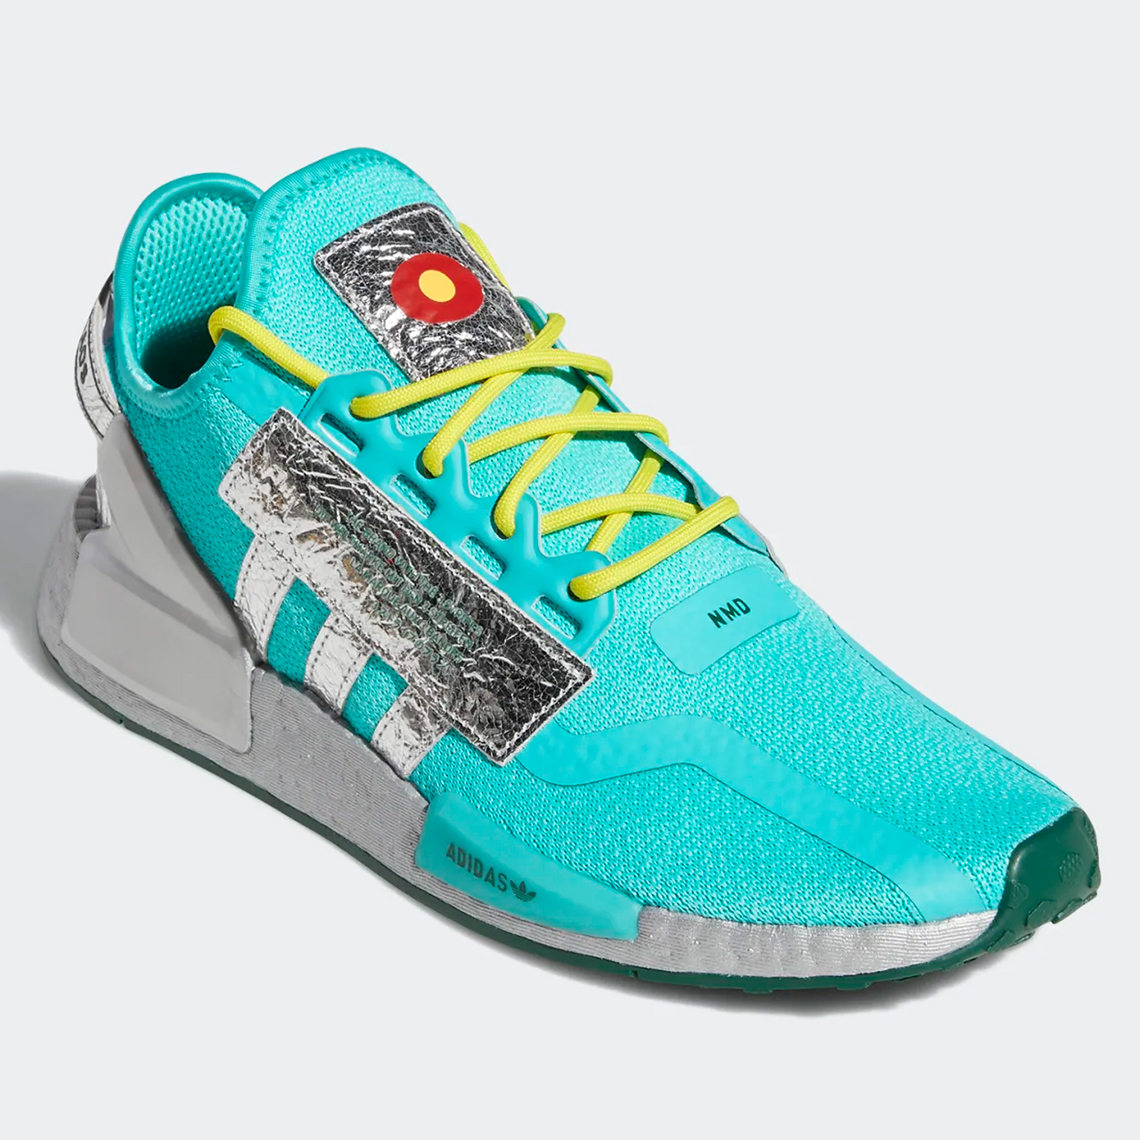 Nmd R1 V2 South Park Shoes Multi Gy6477